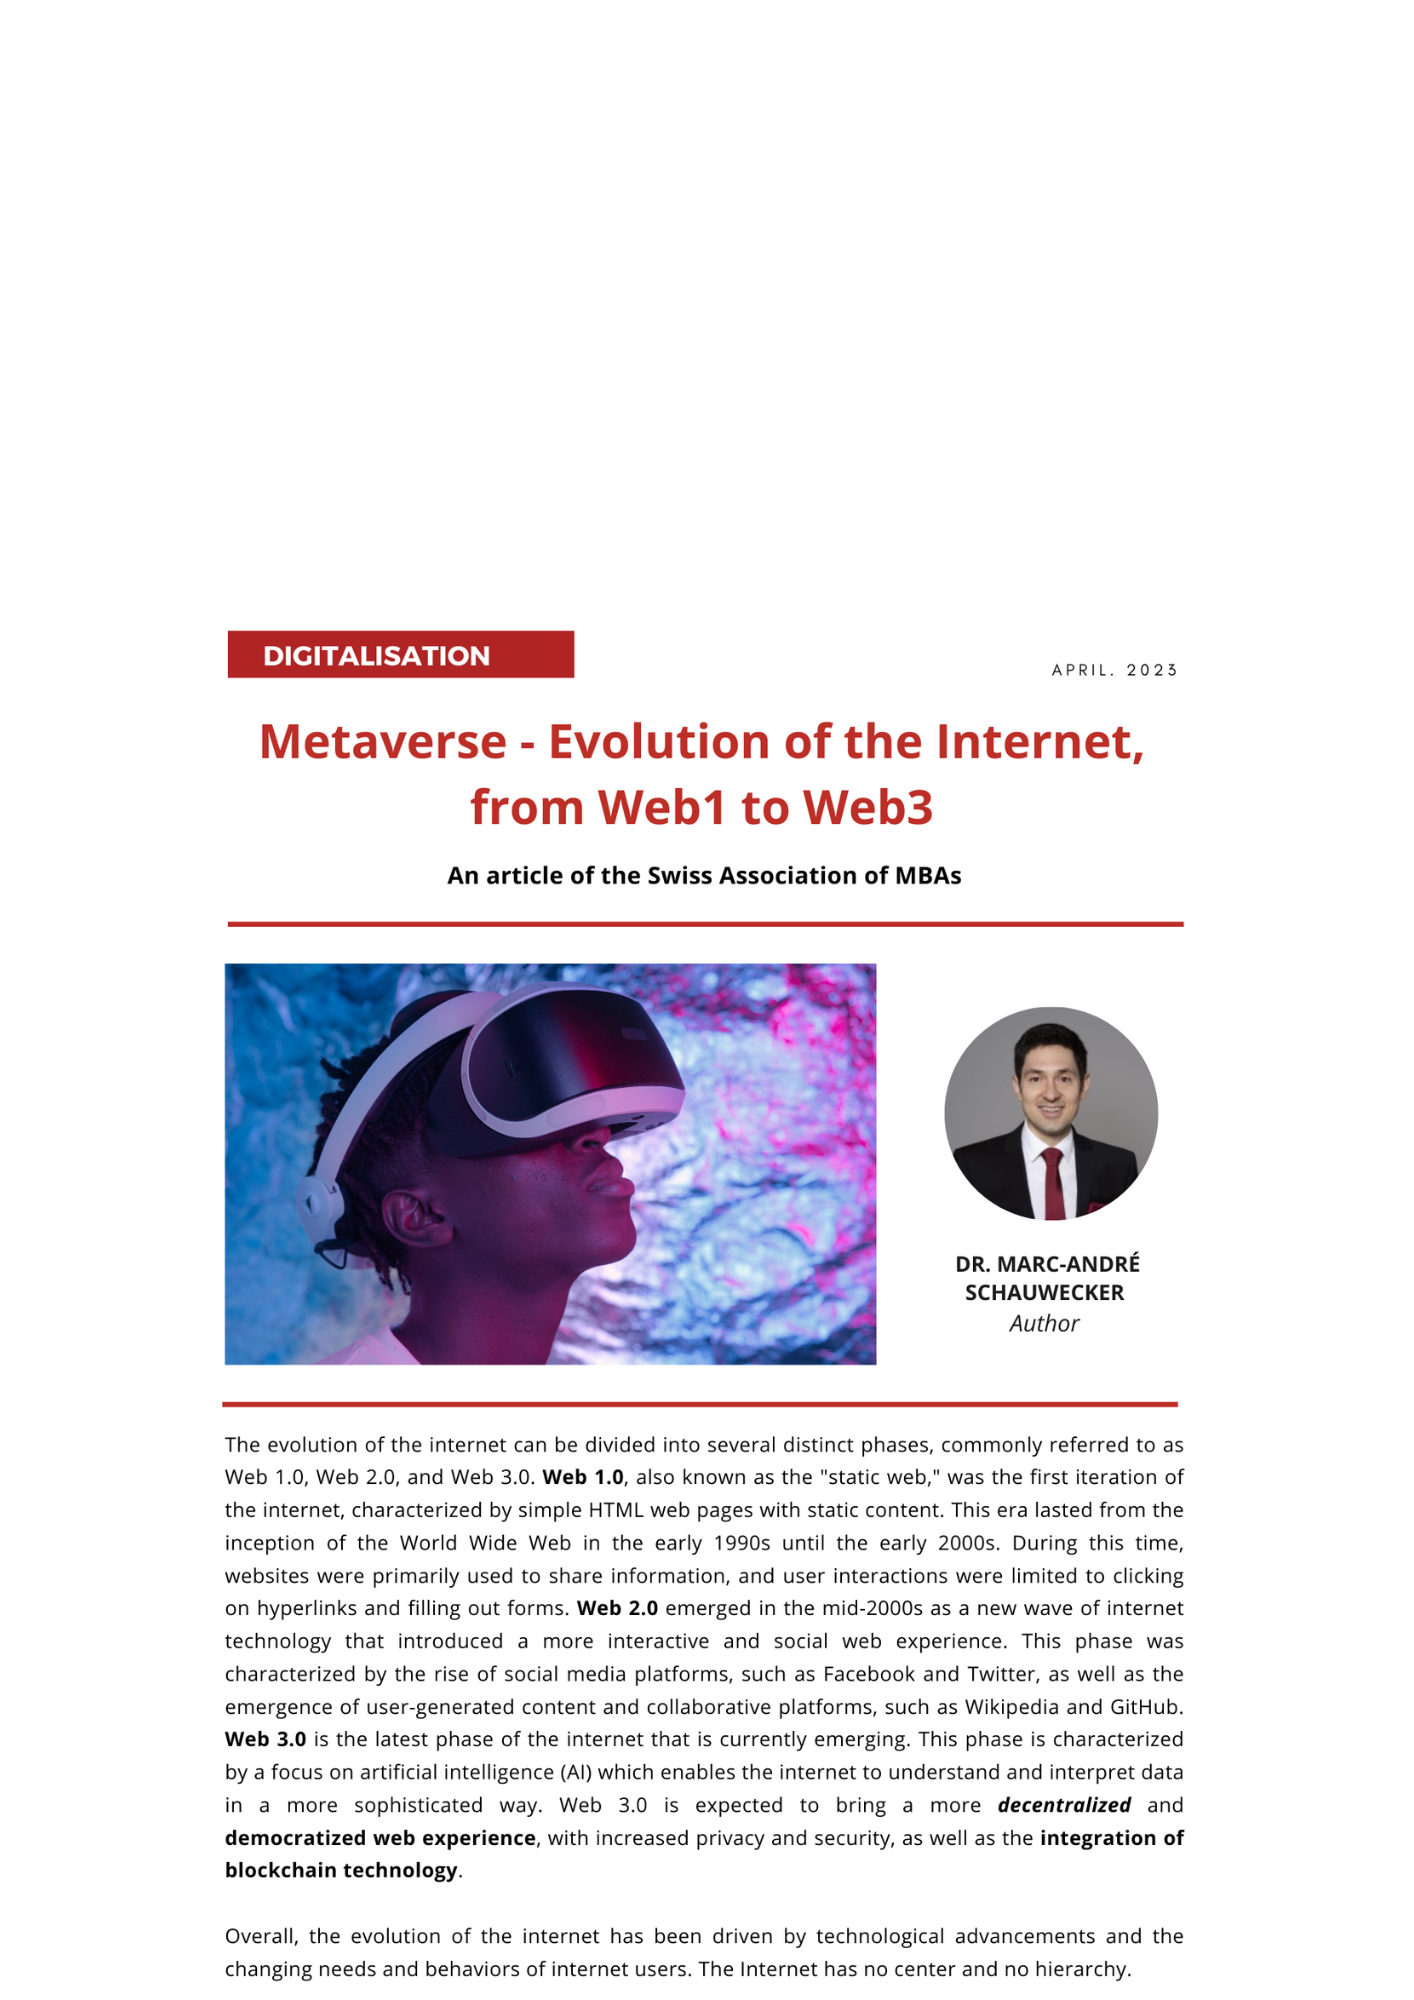 Metaverse - Evolution of the Internet, from Web1 to Web3